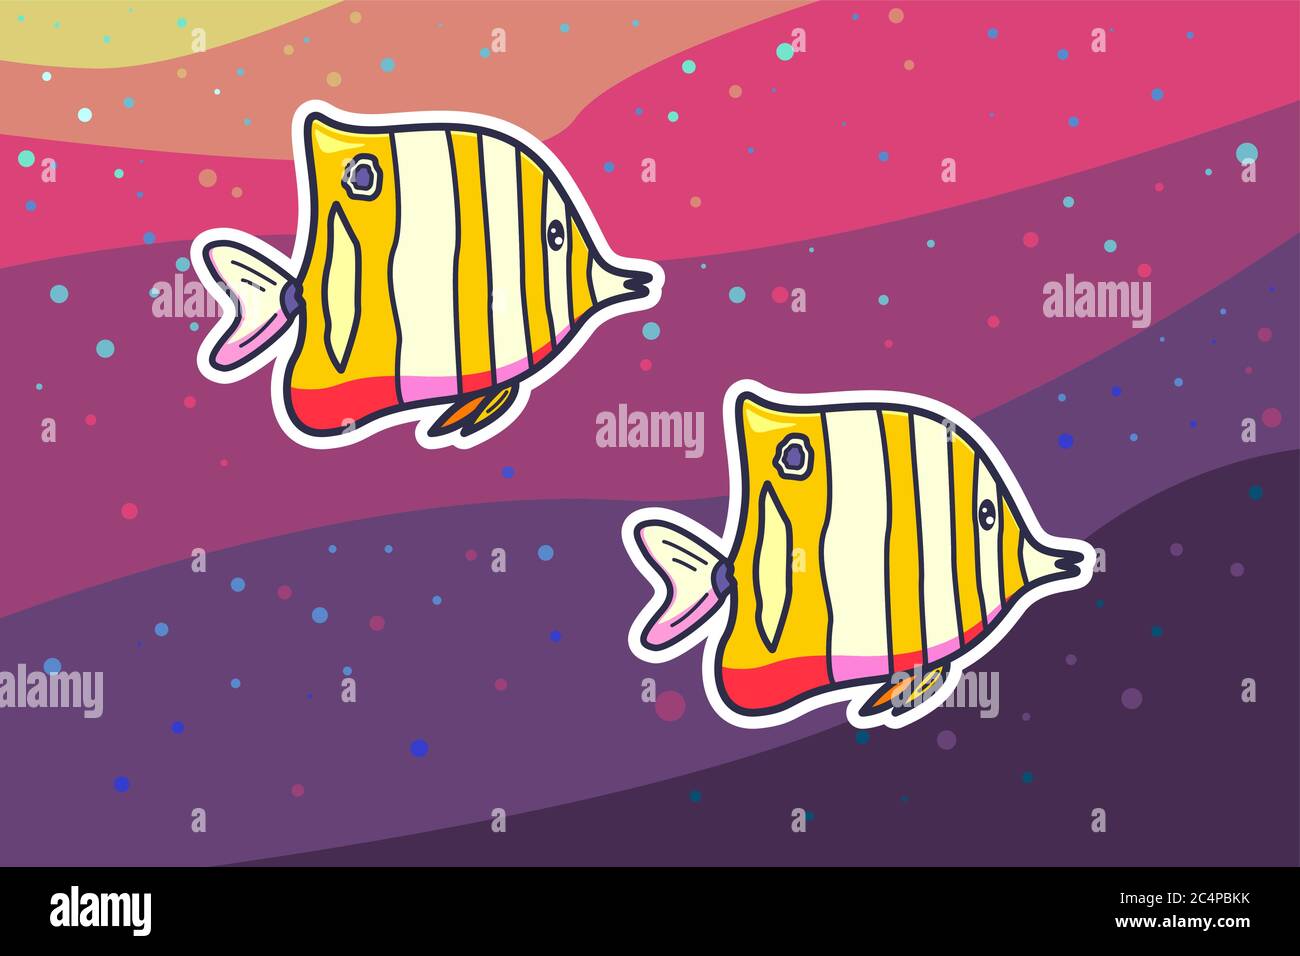 butterfly fish with colorful background vector illustration Stock Vector